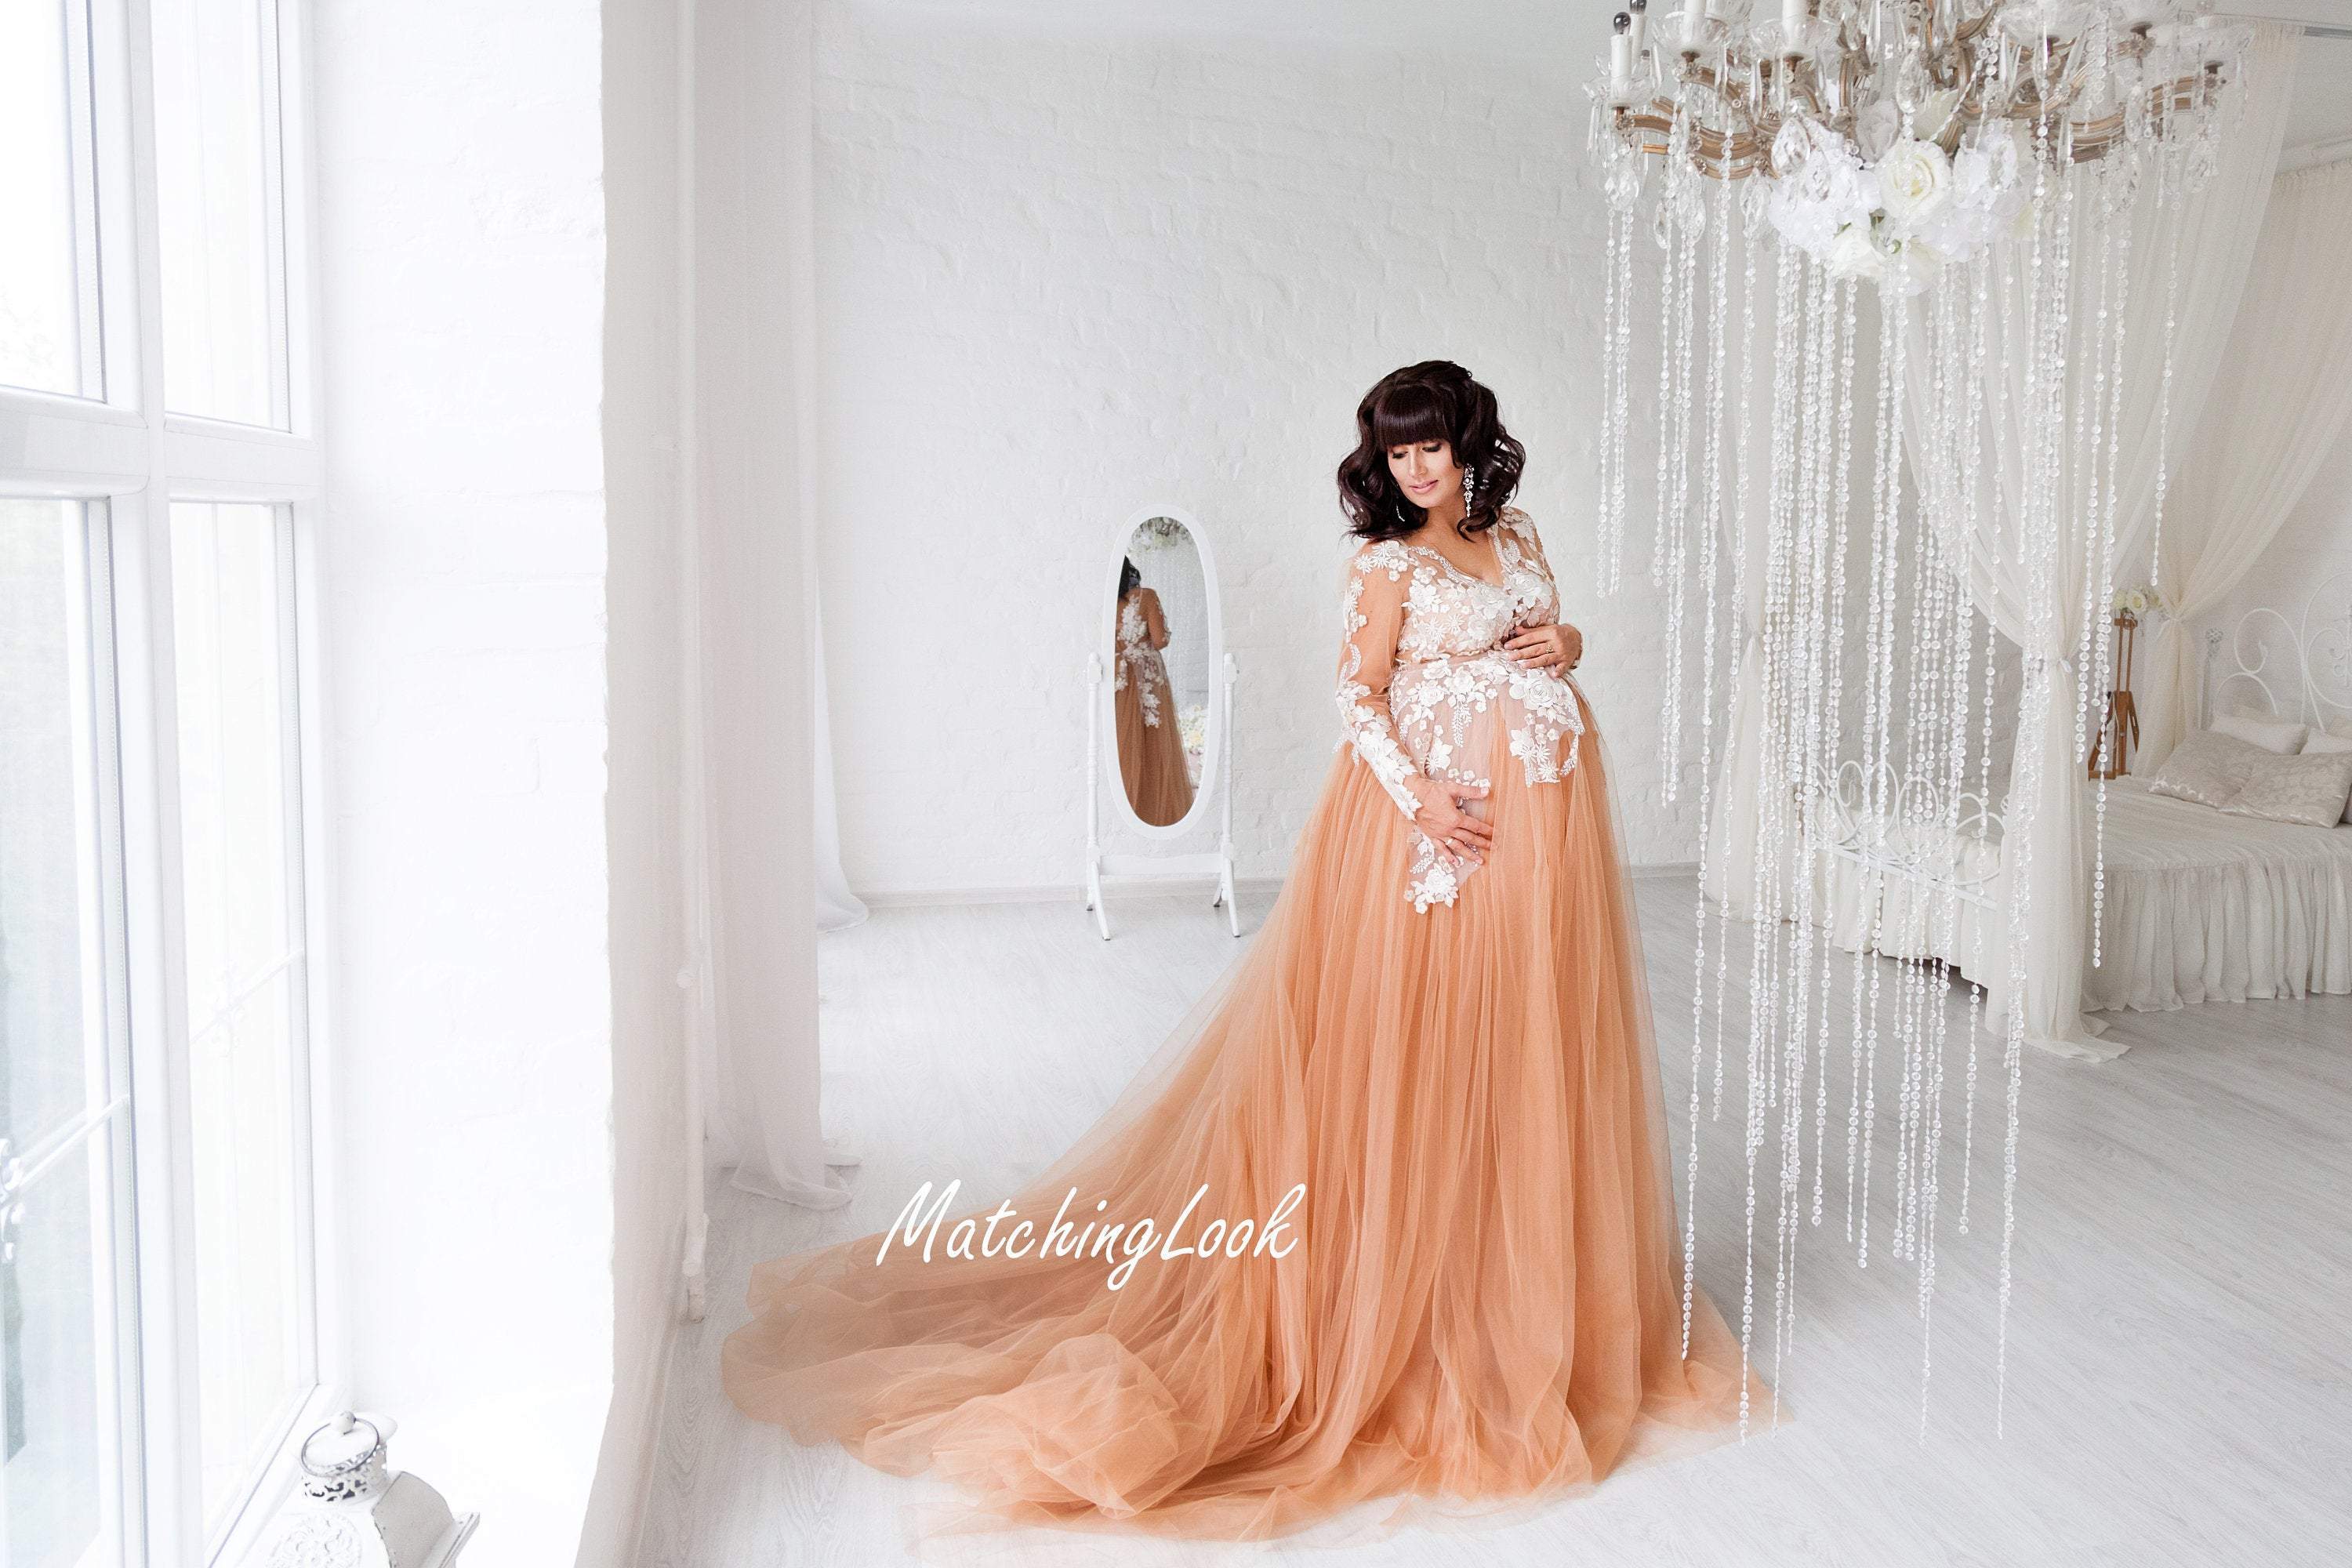 Grey Pregnancy Lace Gown with long train for photo shoot